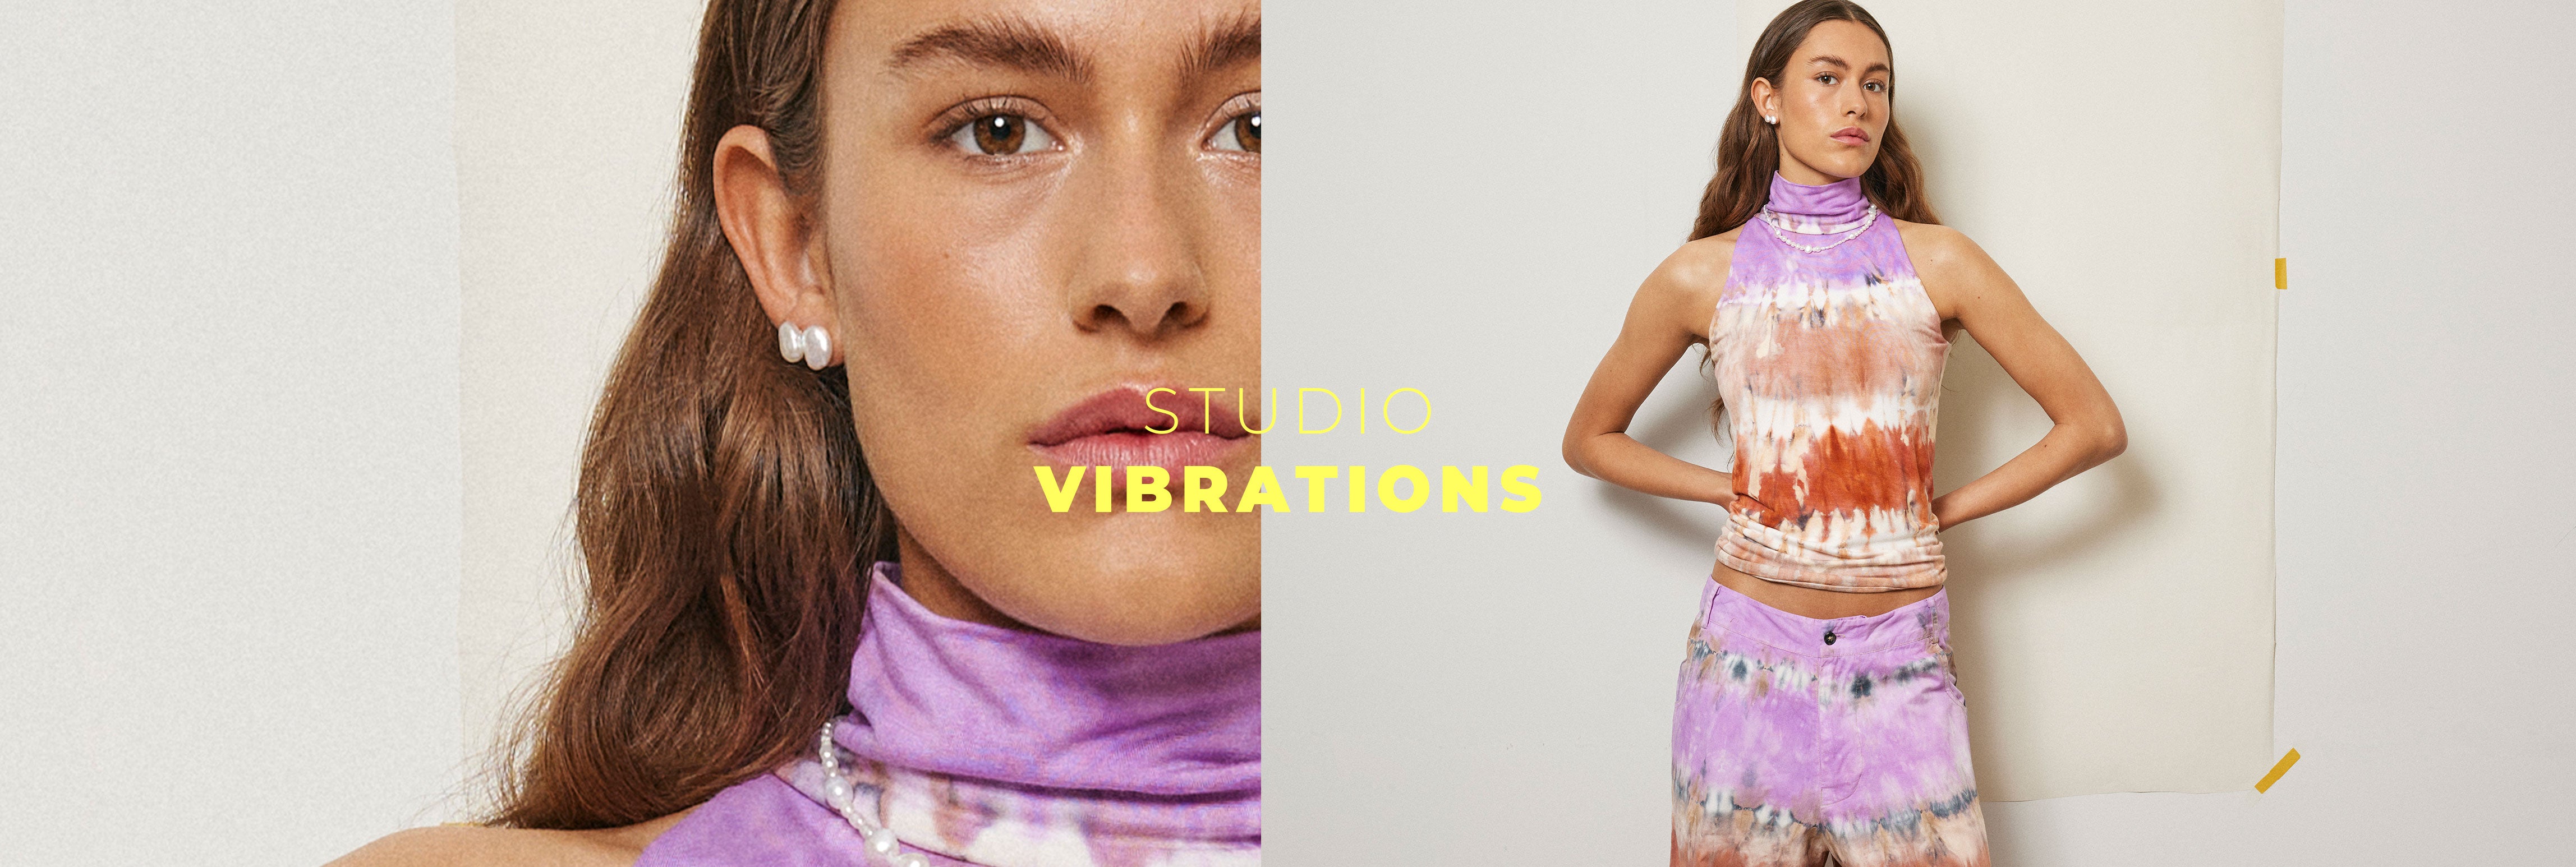 STUDIO VIBRATIONS SPRING 23 JEWELRY COLLECTION